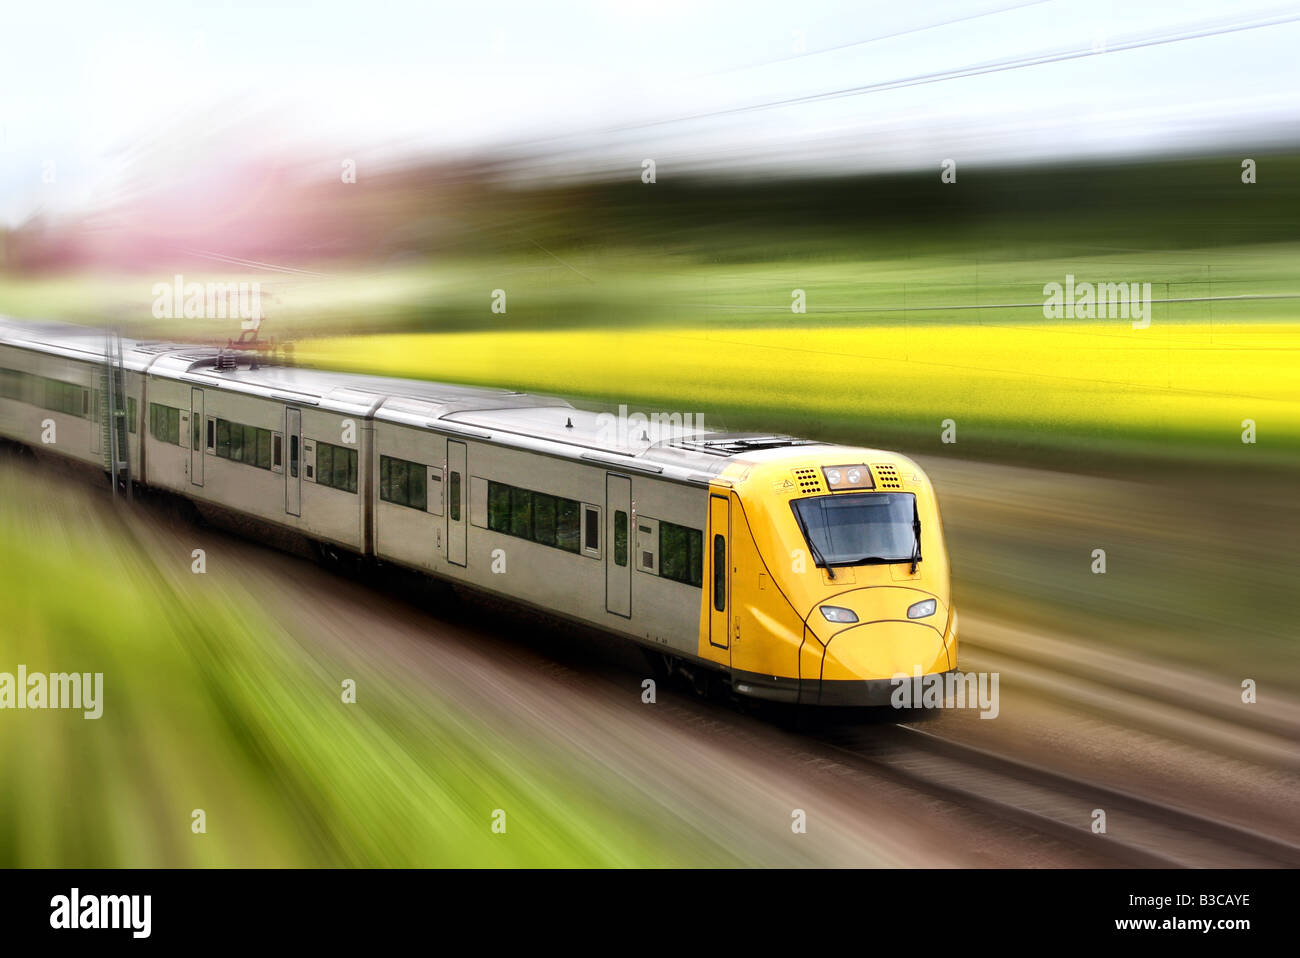 Train in motion Stock Photo